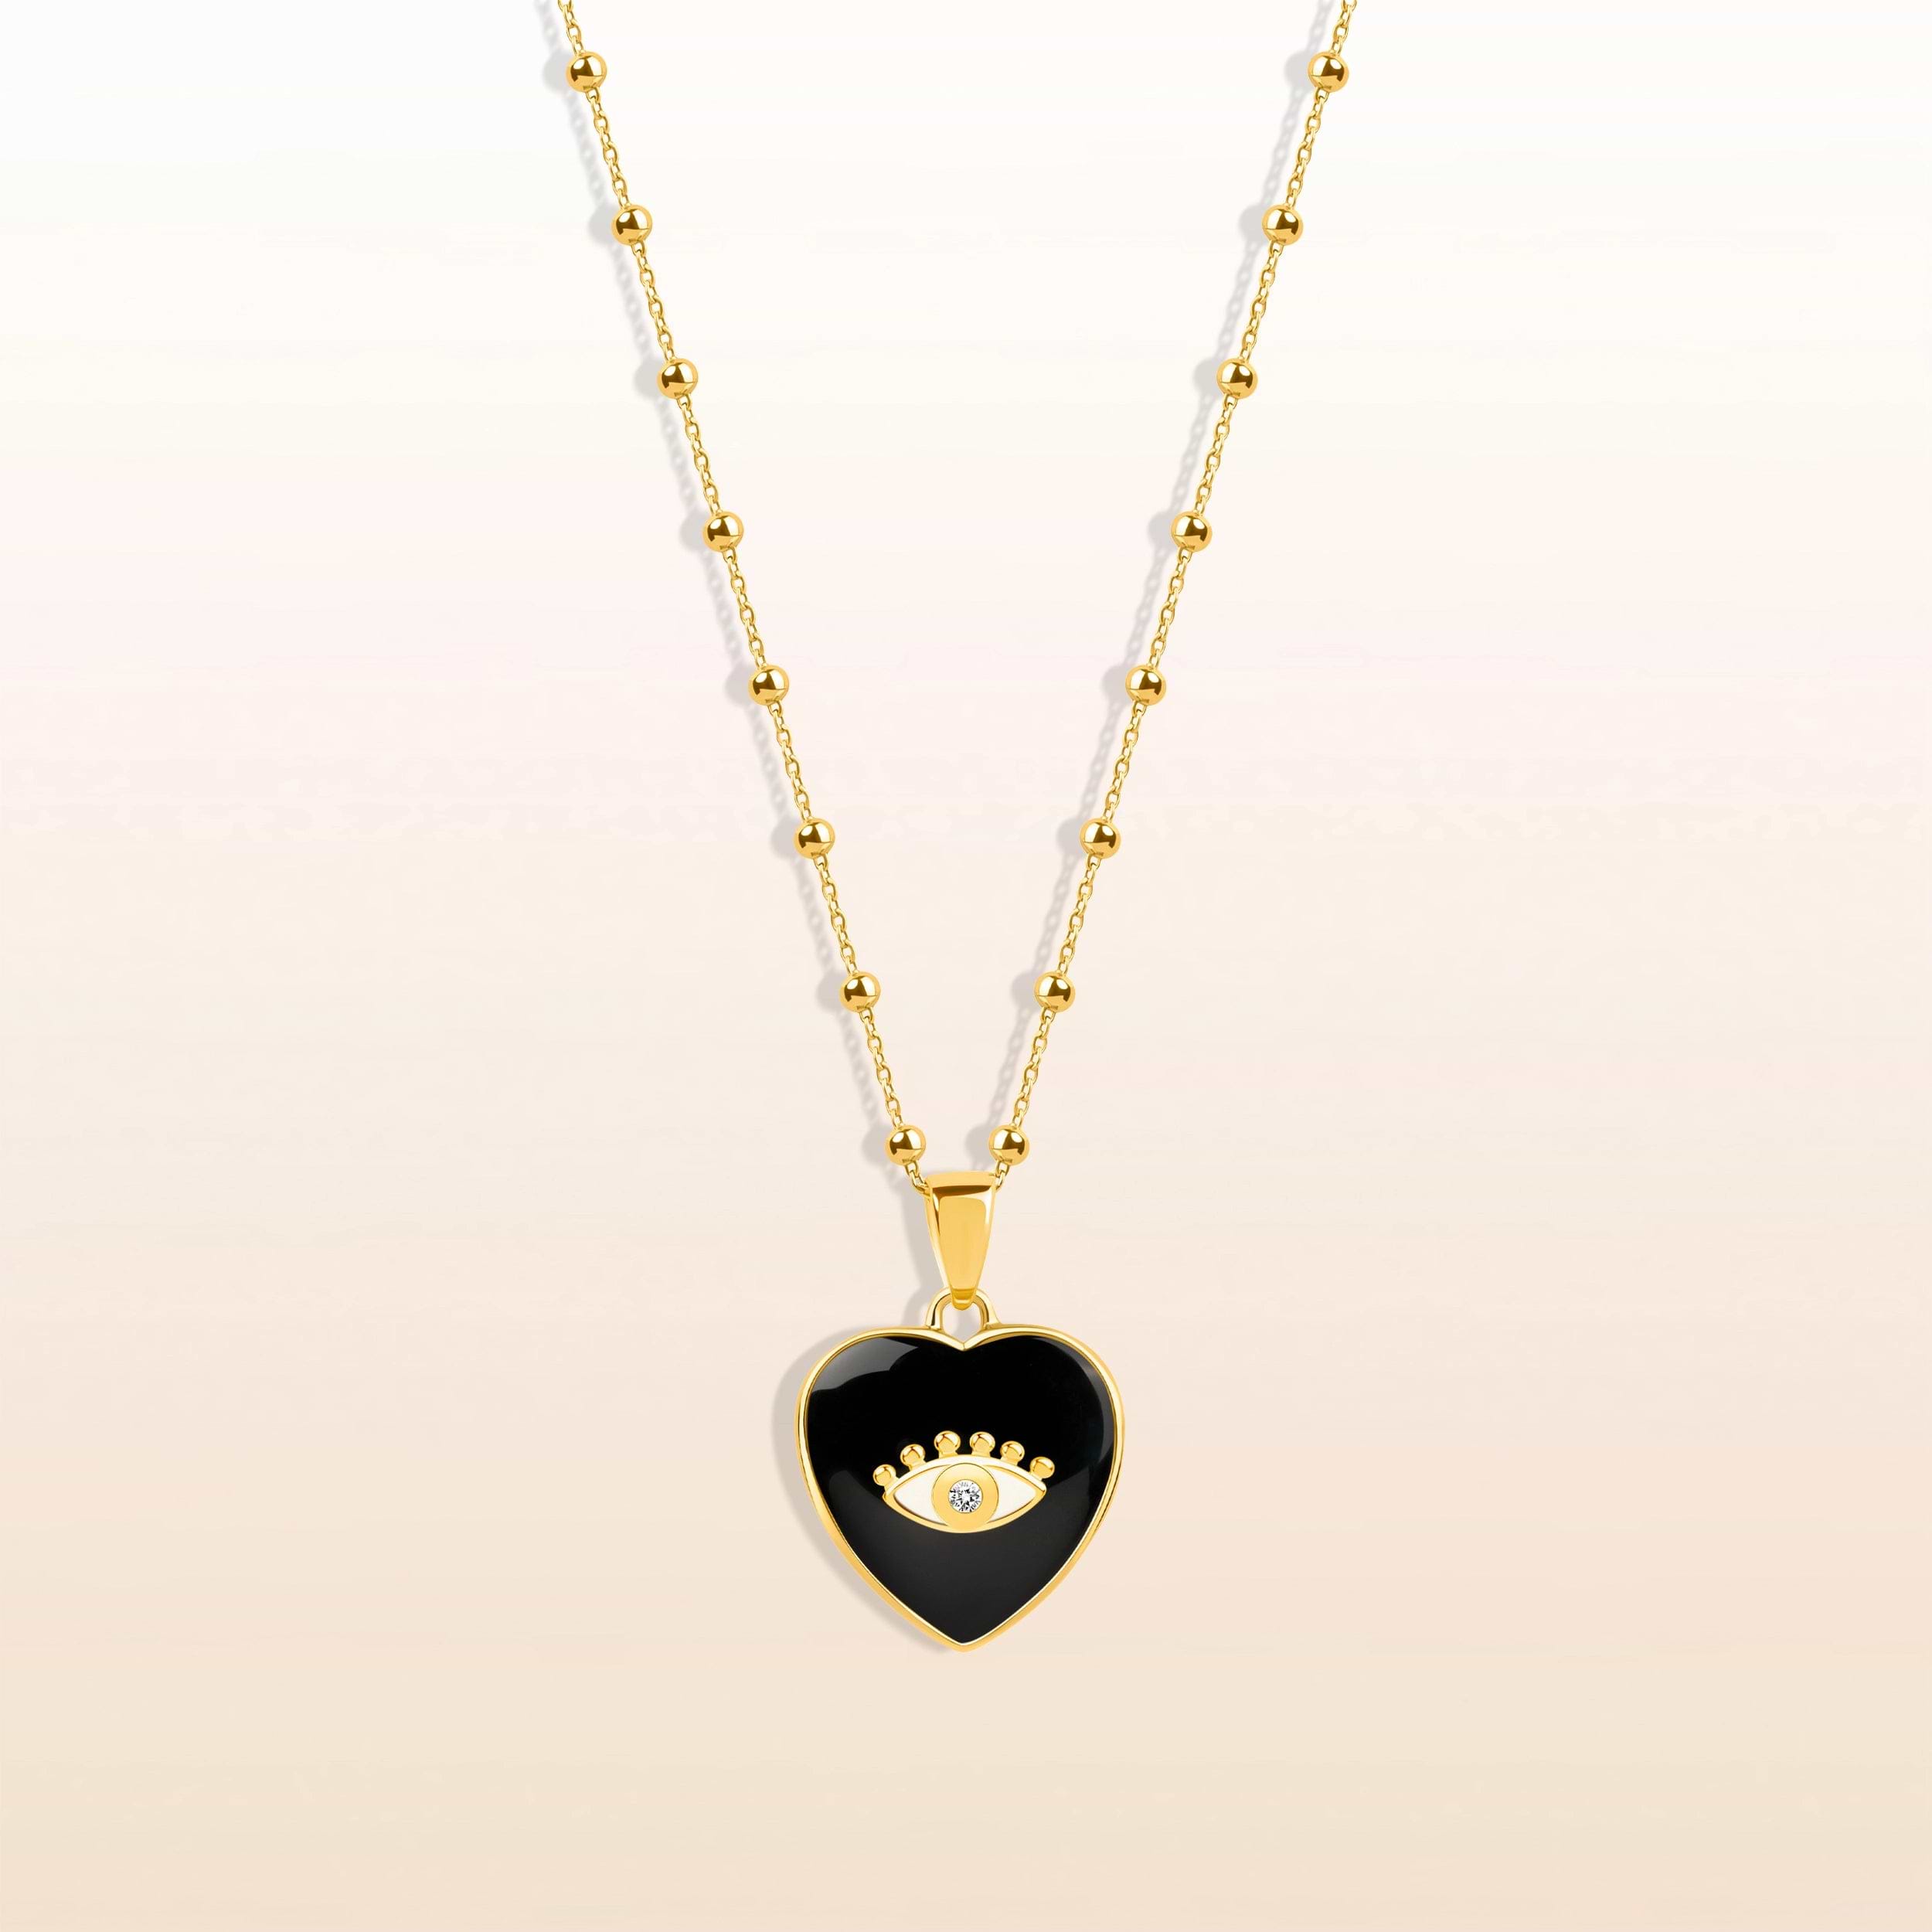 With every step, take comfort in knowing the divine love of the Universe protects you. Our brilliant "Grounded in Love - Black Onyx Heart Diamond Evil Eye Necklace" will infuse love and spiritual protection into all areas of your life.